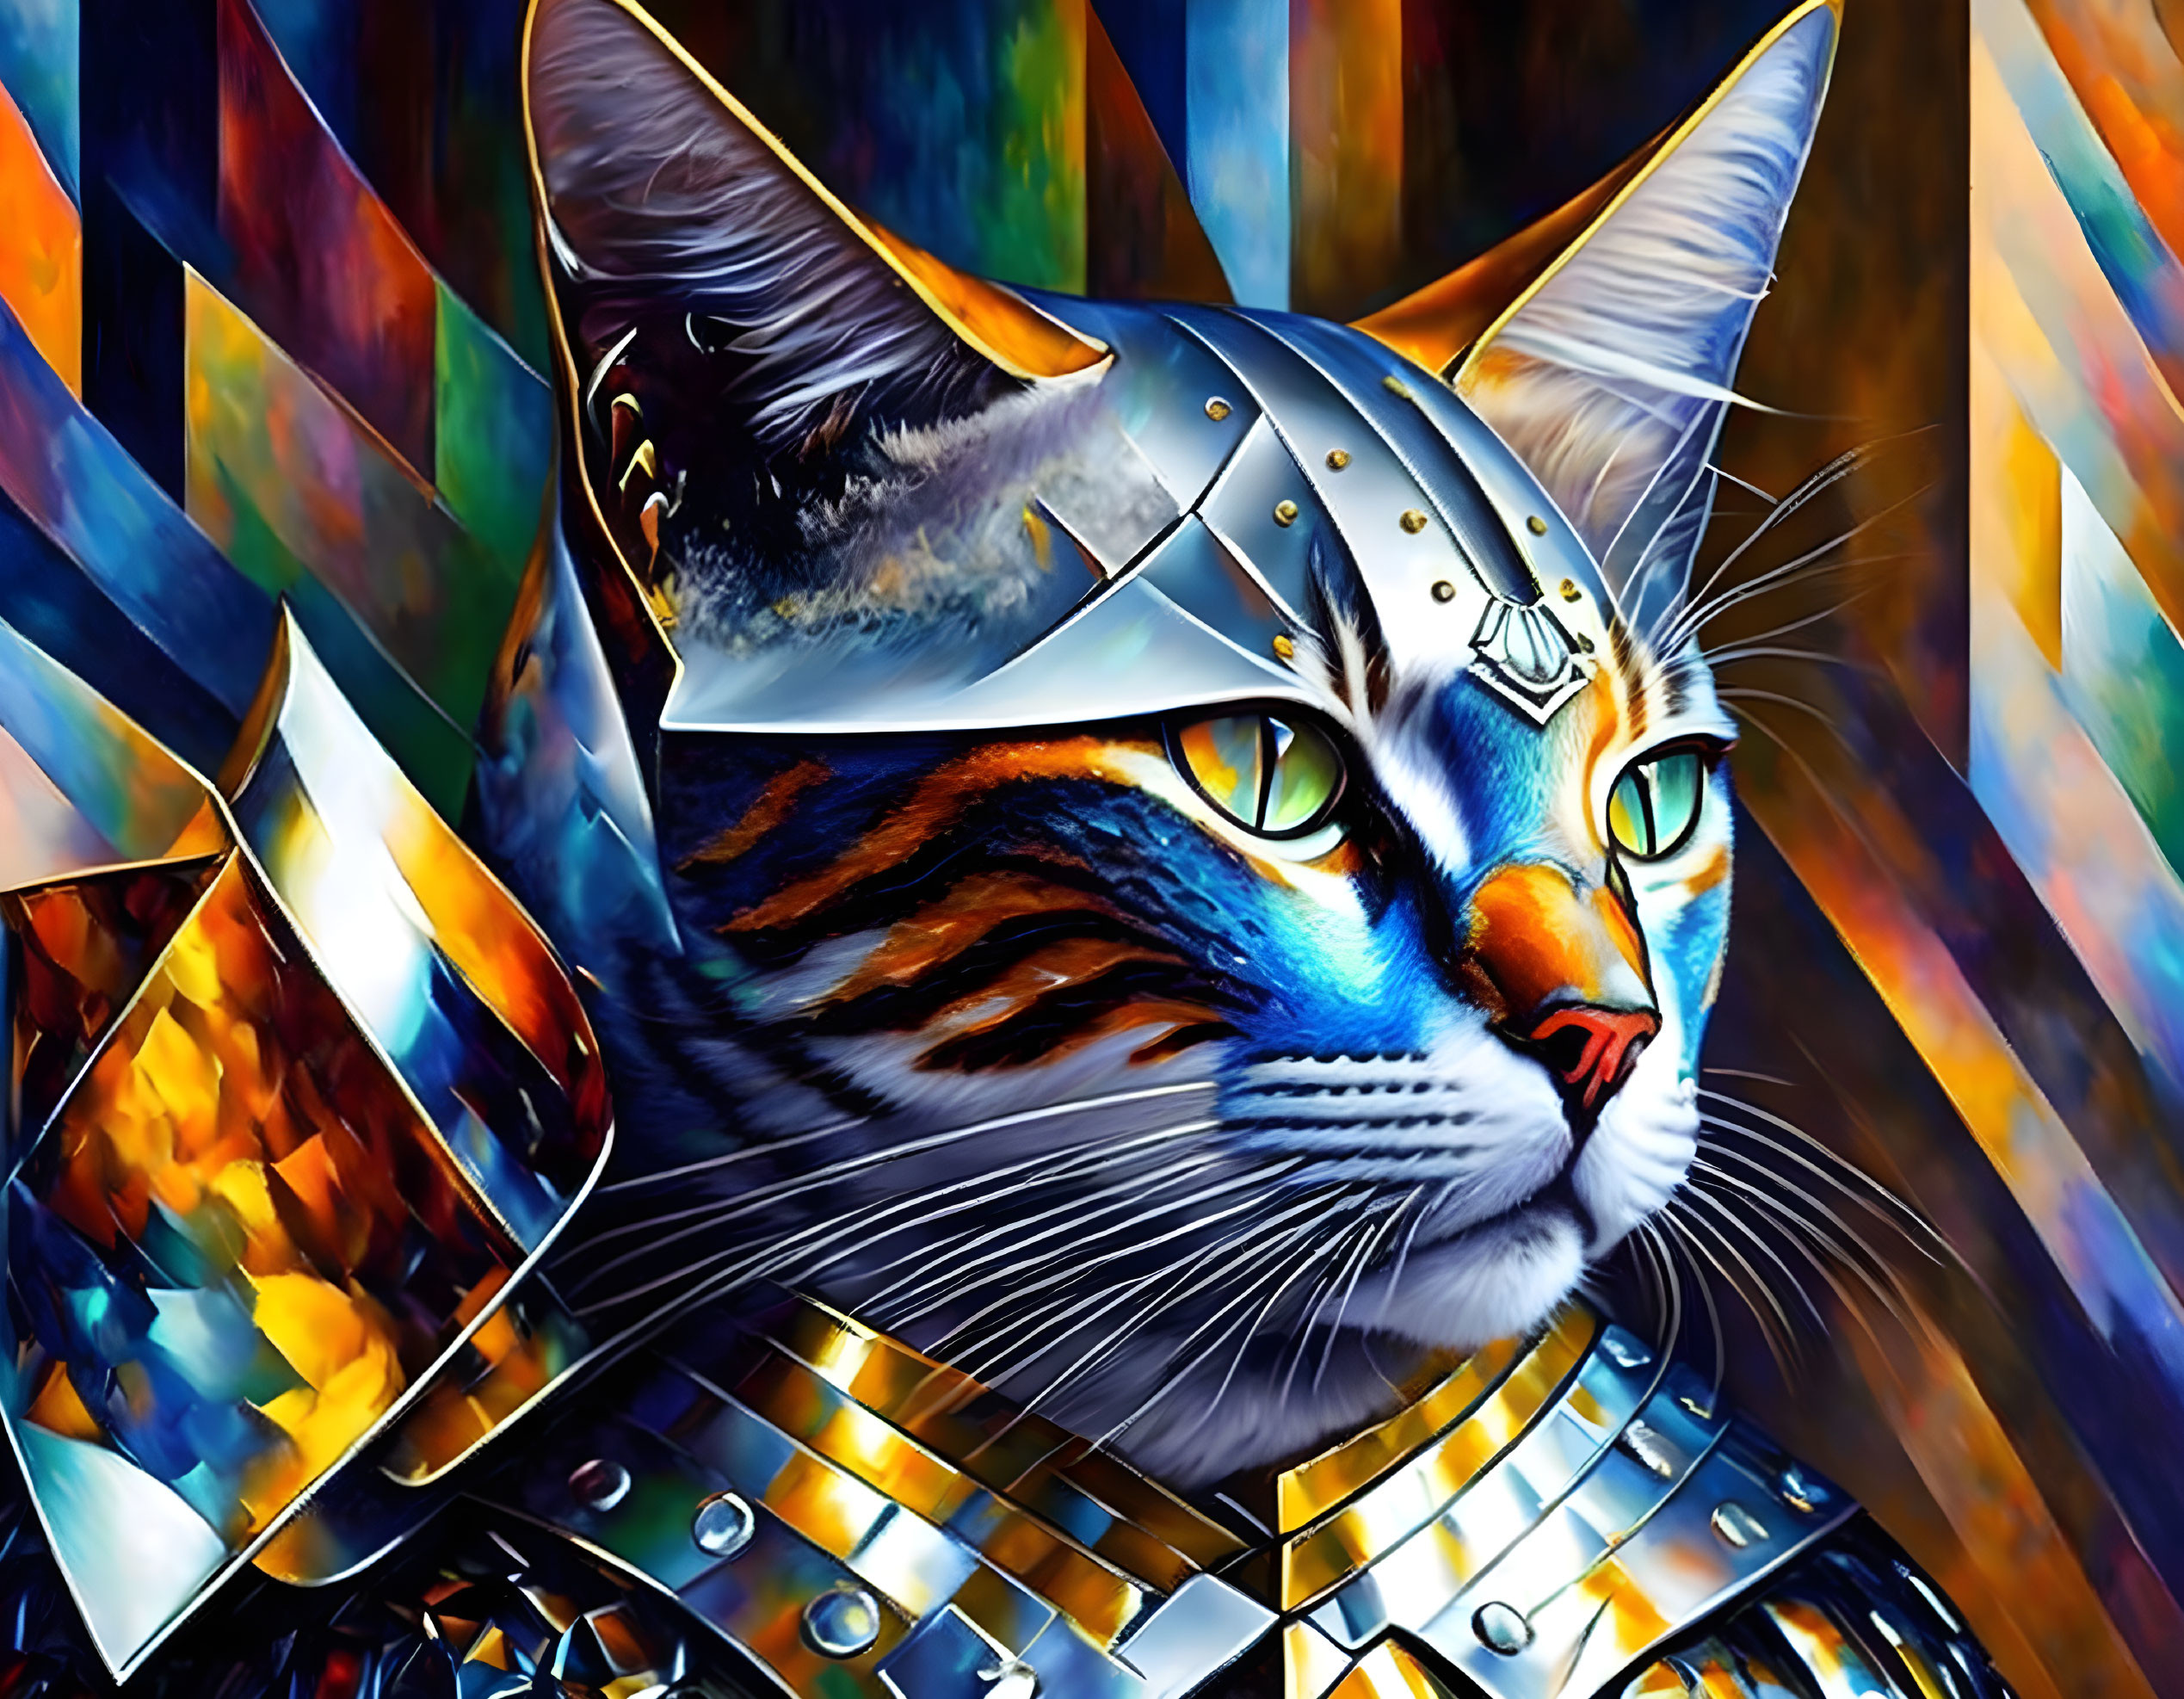 Colorful Digital Artwork: Cat in Knight's Armor with Geometric Background